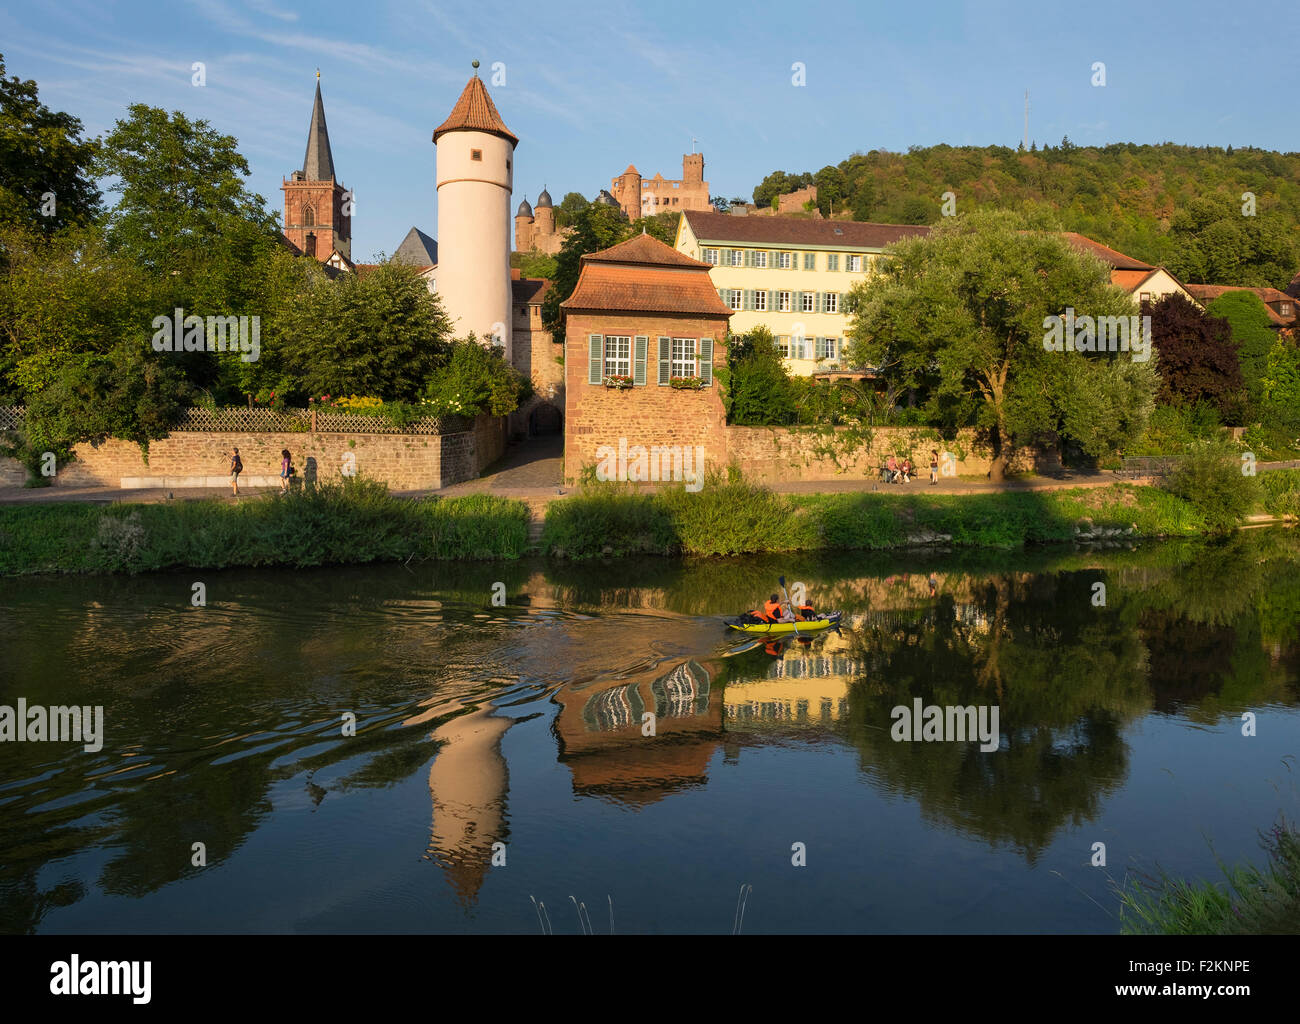 River Tauber, Kittsteintor, Red Tower, Town church and castle ruins, Wertheim, Baden-Württemberg, Germany Stock Photo